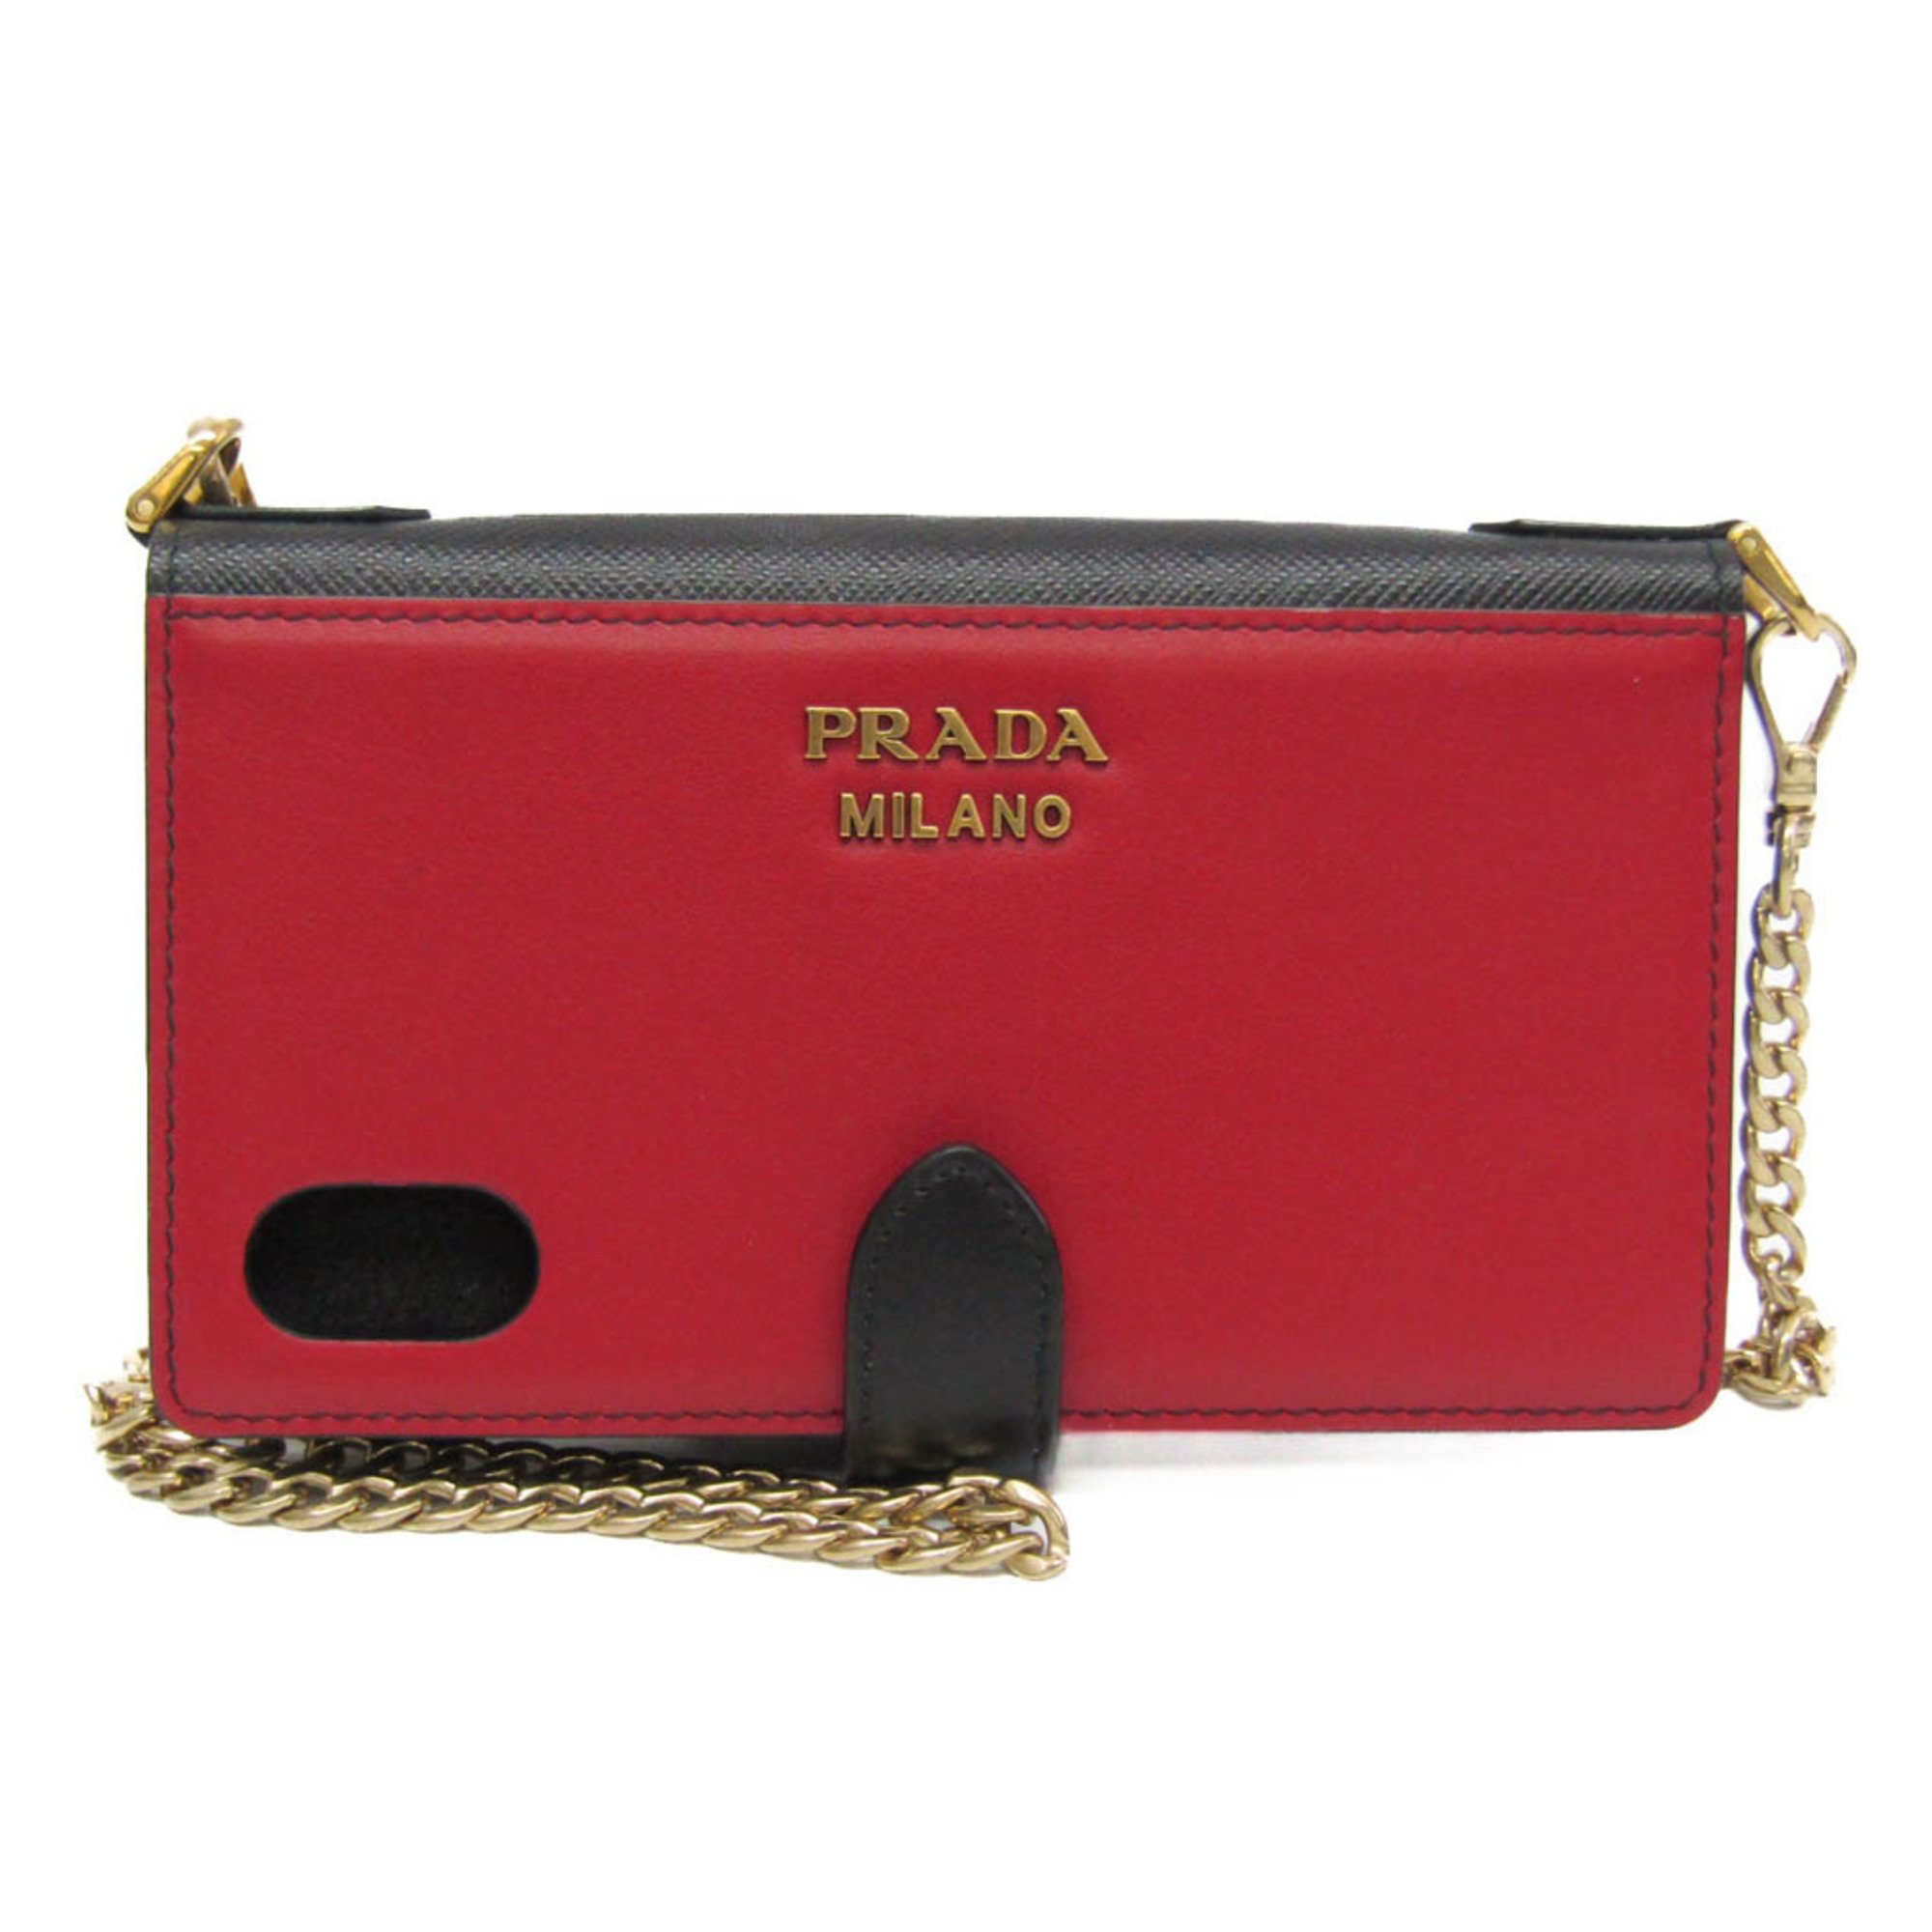 Prada Leather Phone Flip Case For IPhone X Black,Red Color 1ZH078